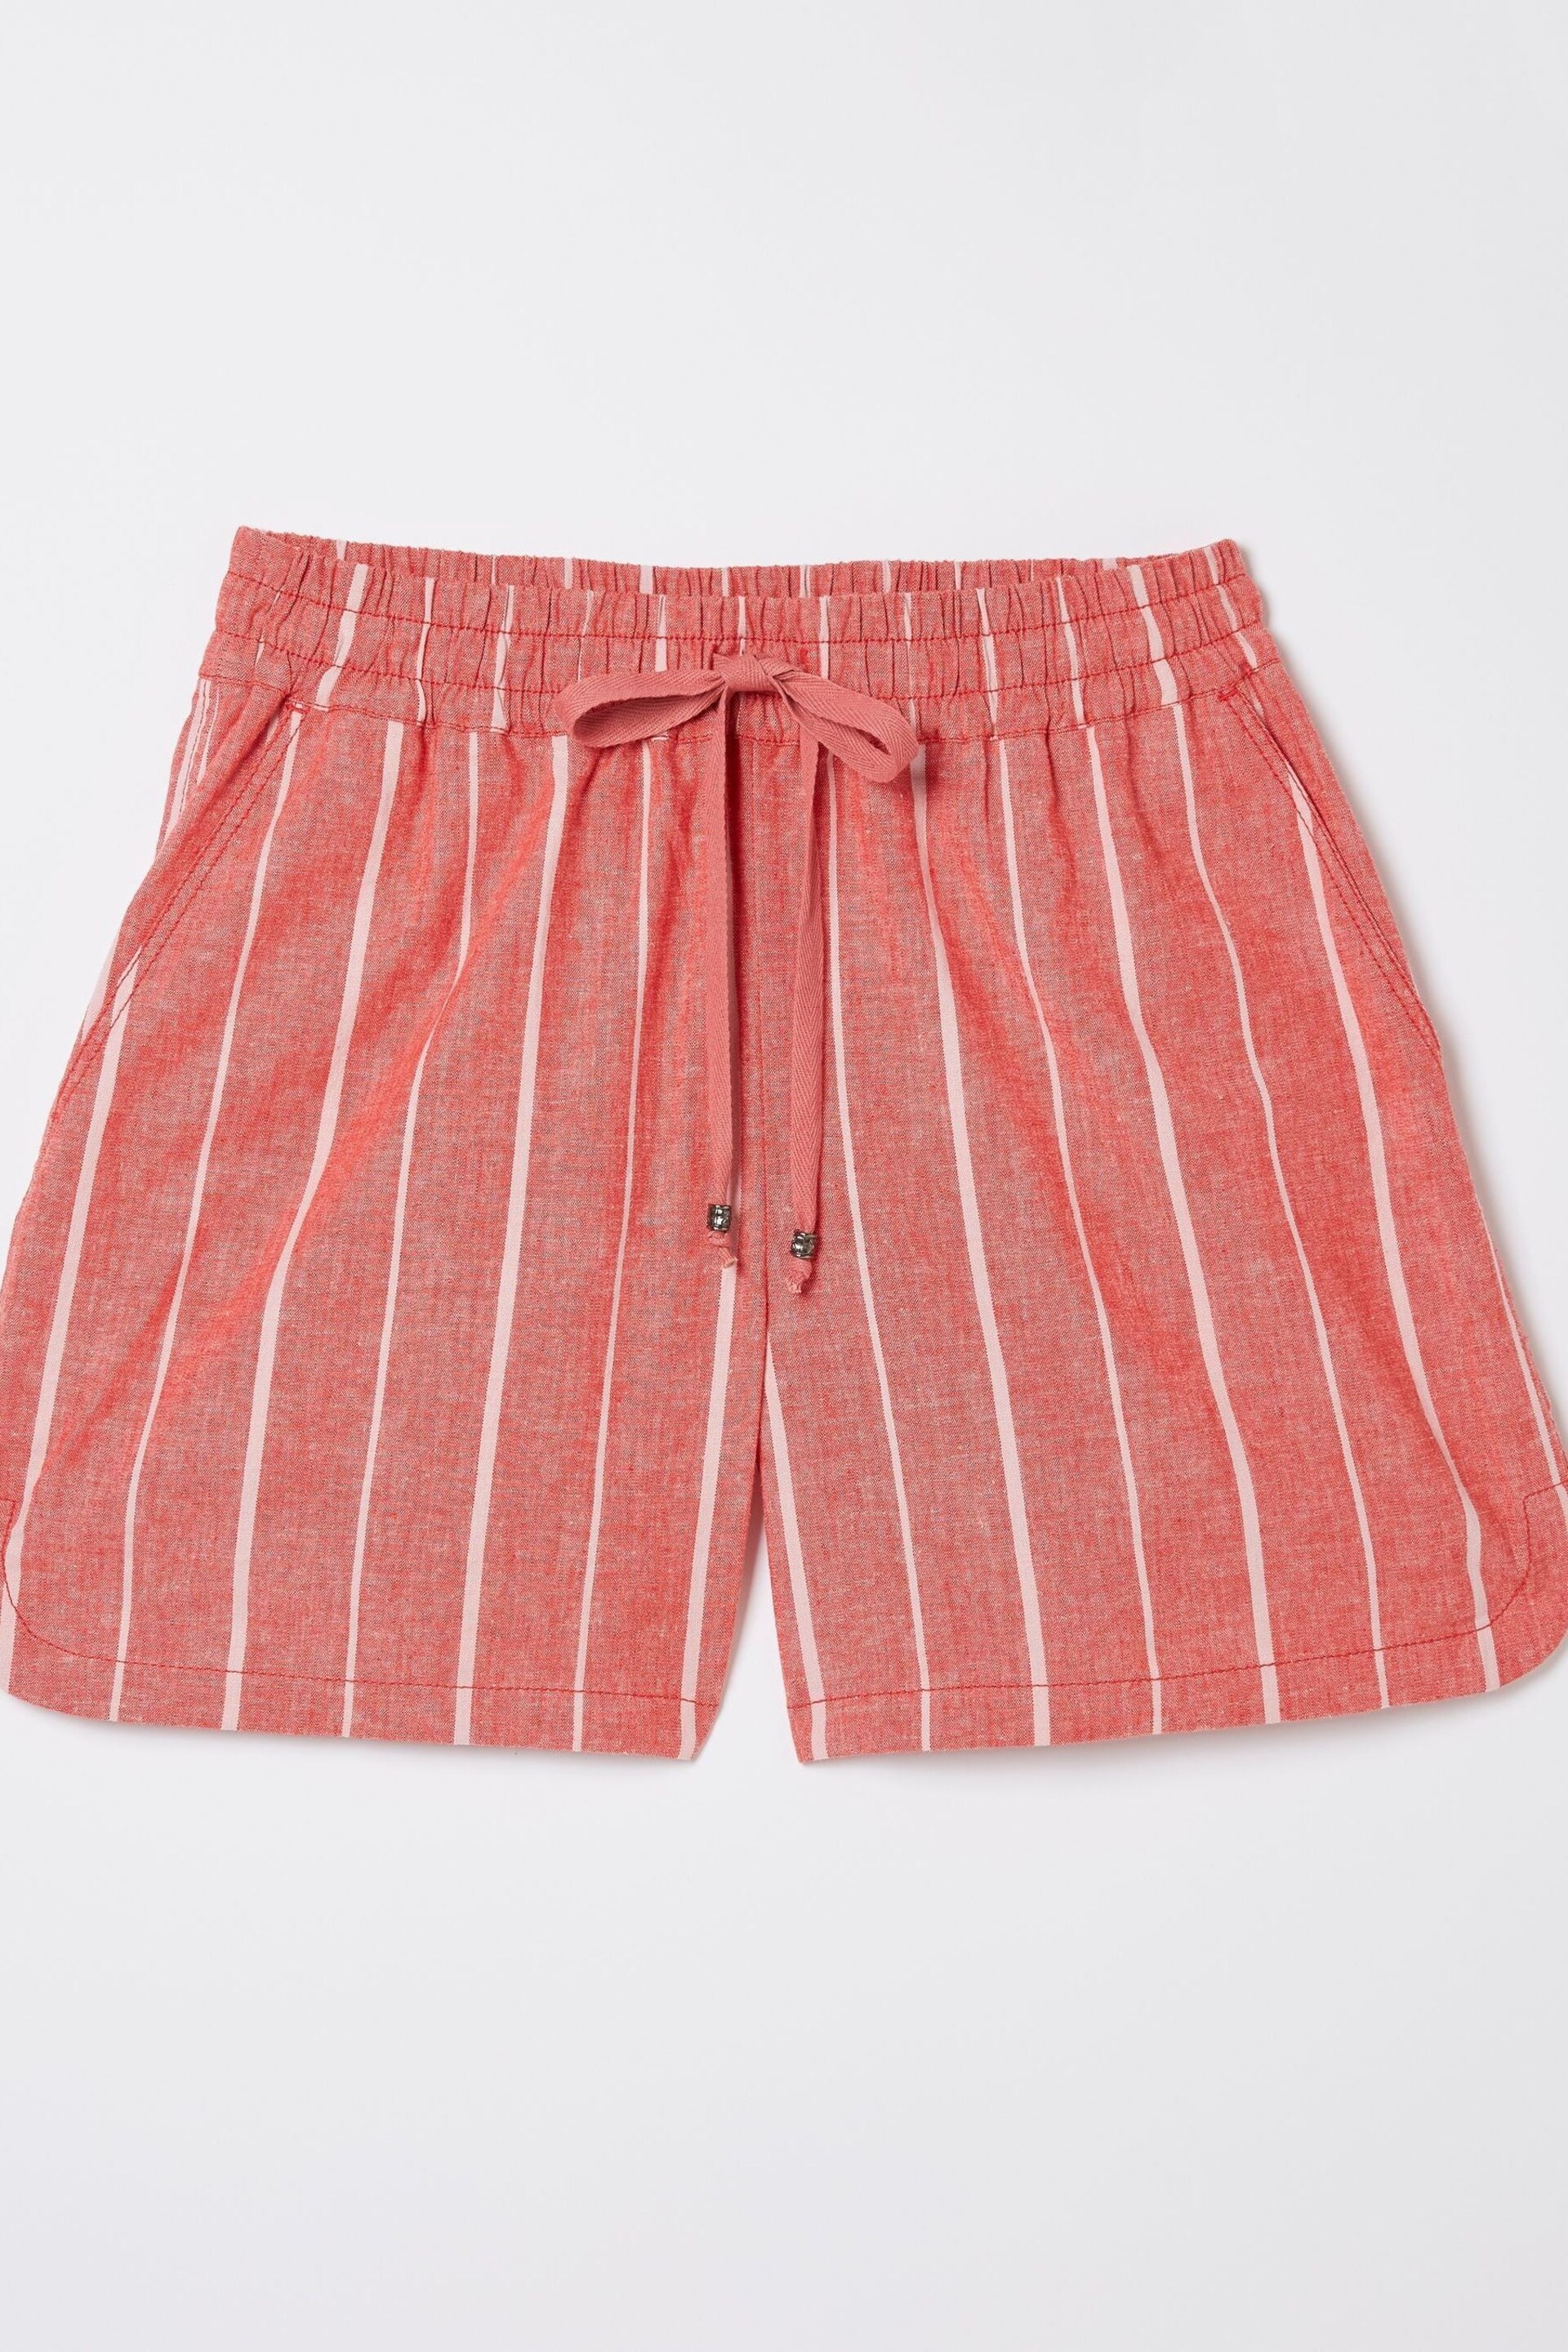 FatFace Red Tenby Linen Blend Stripe Shorts - Image 5 of 5